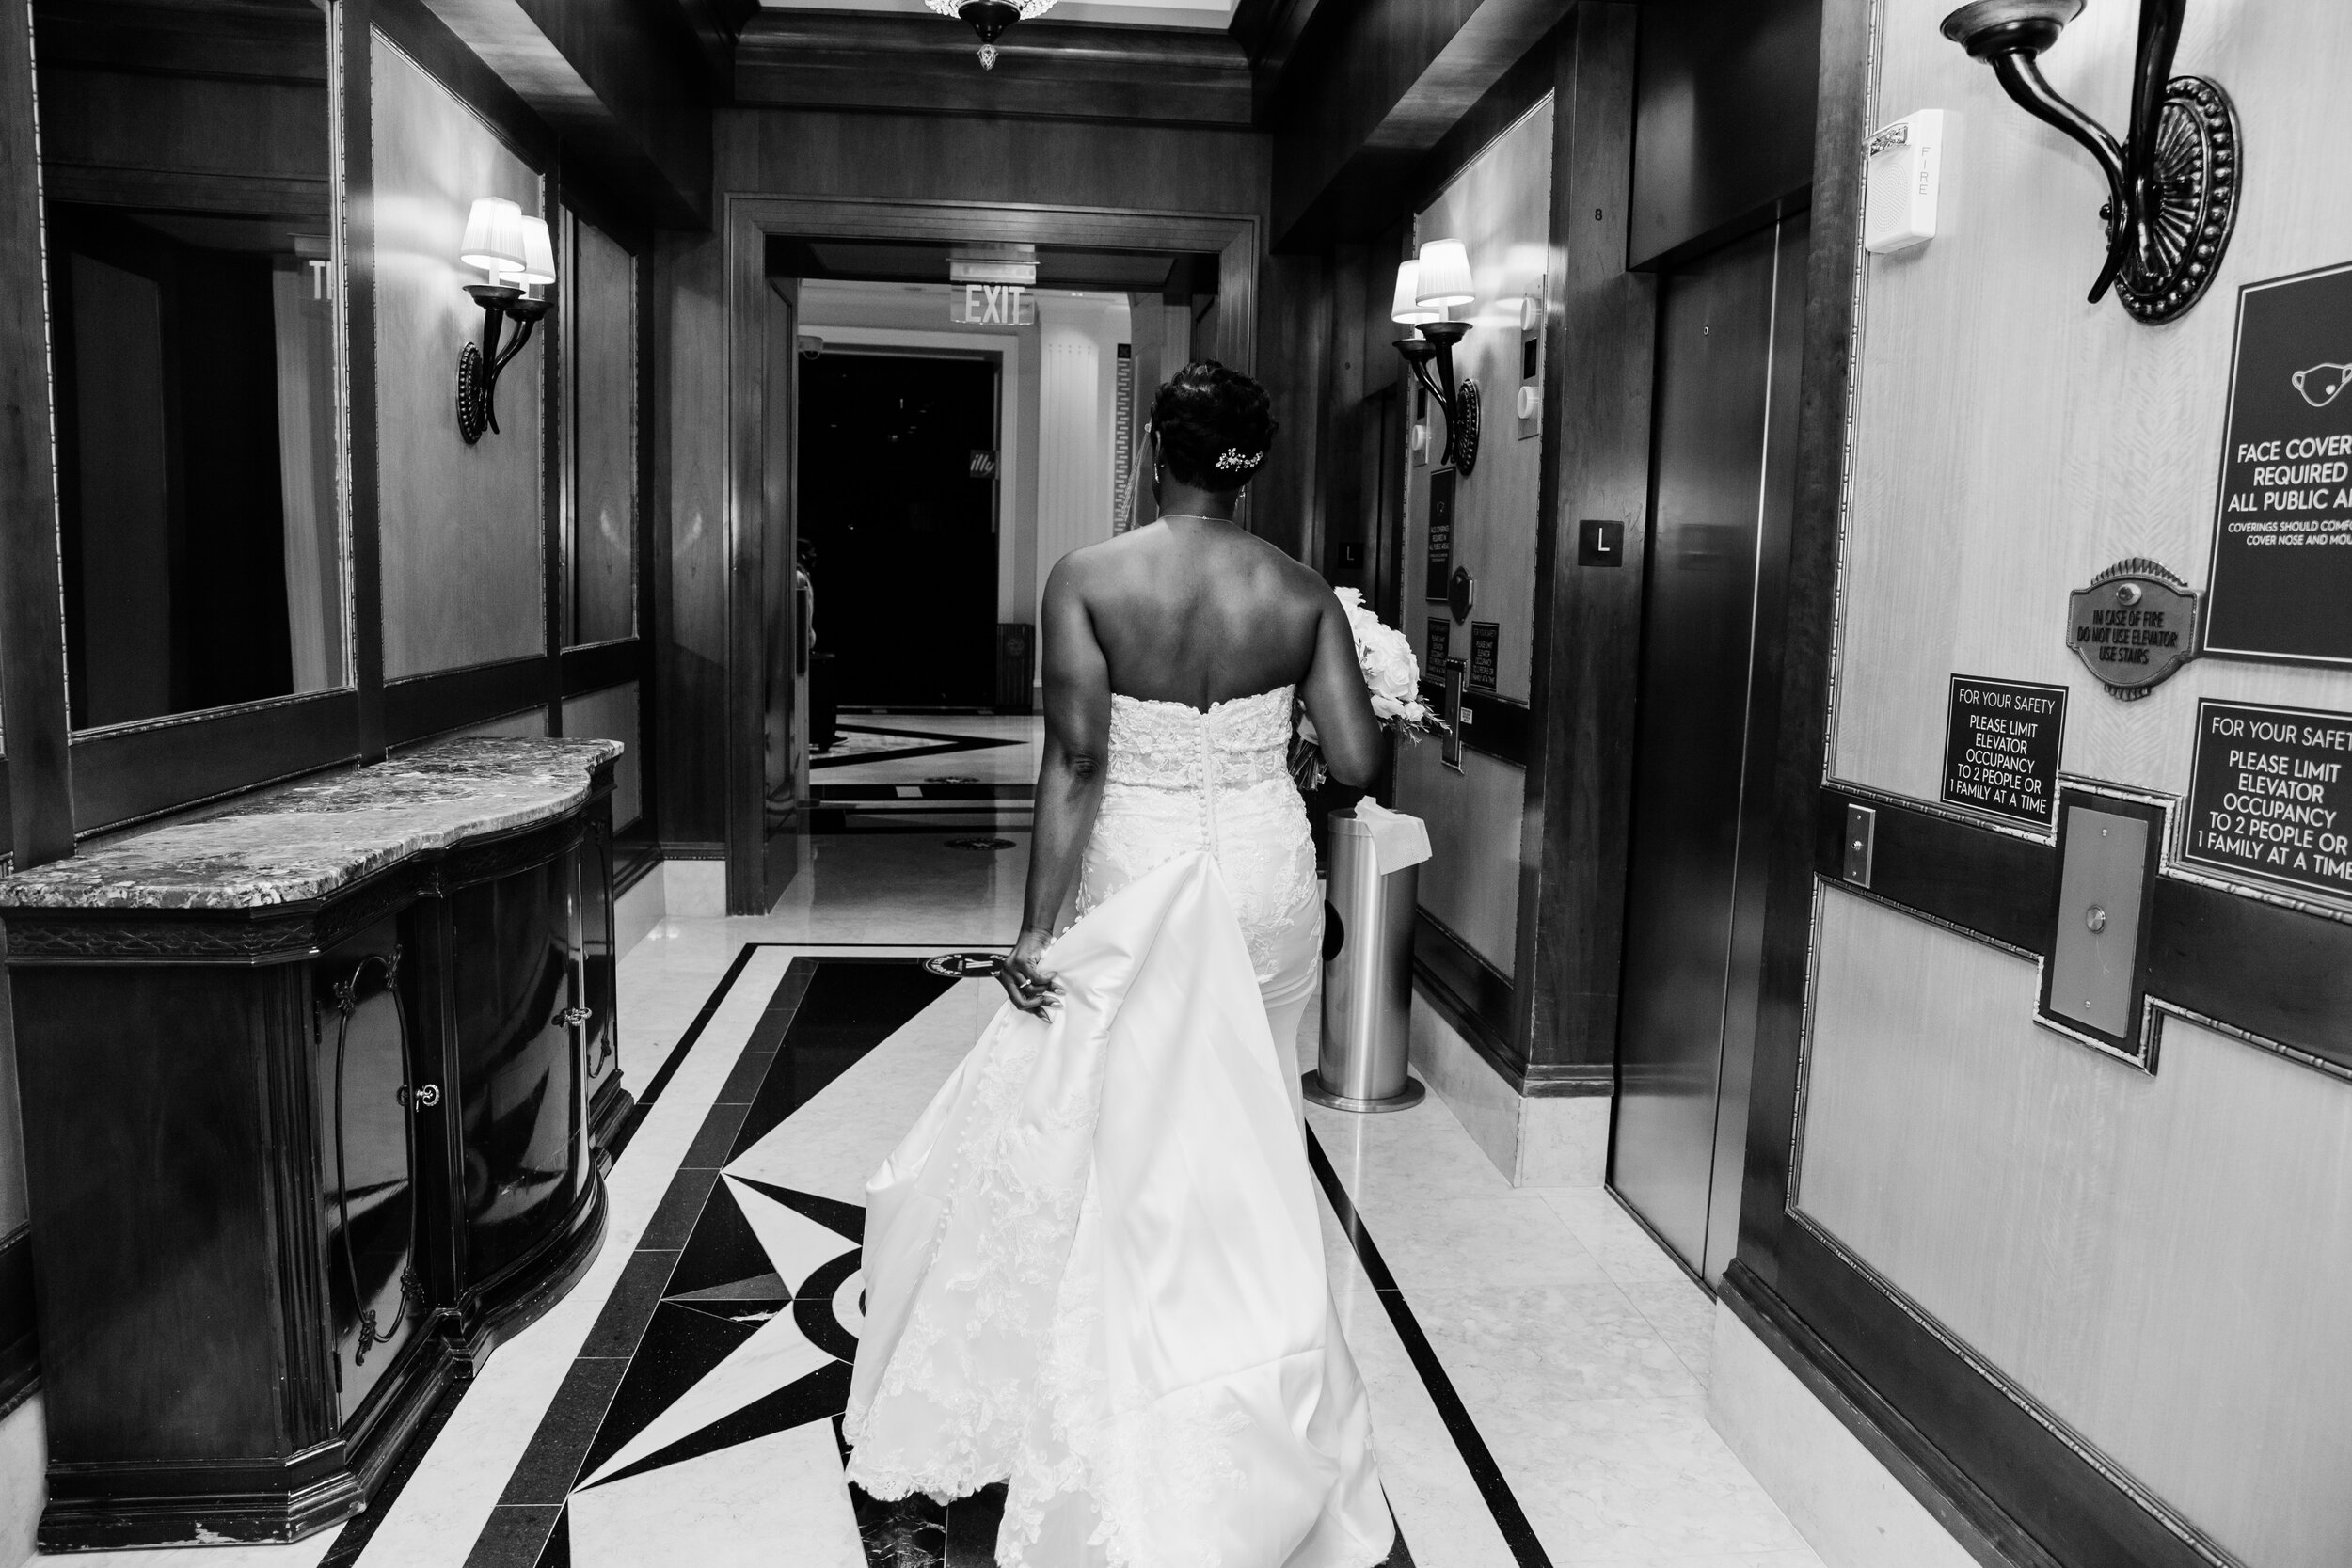 get married in baltimore city hall shot by megapixels media biracial couple wedding photographers maryland-56.jpg